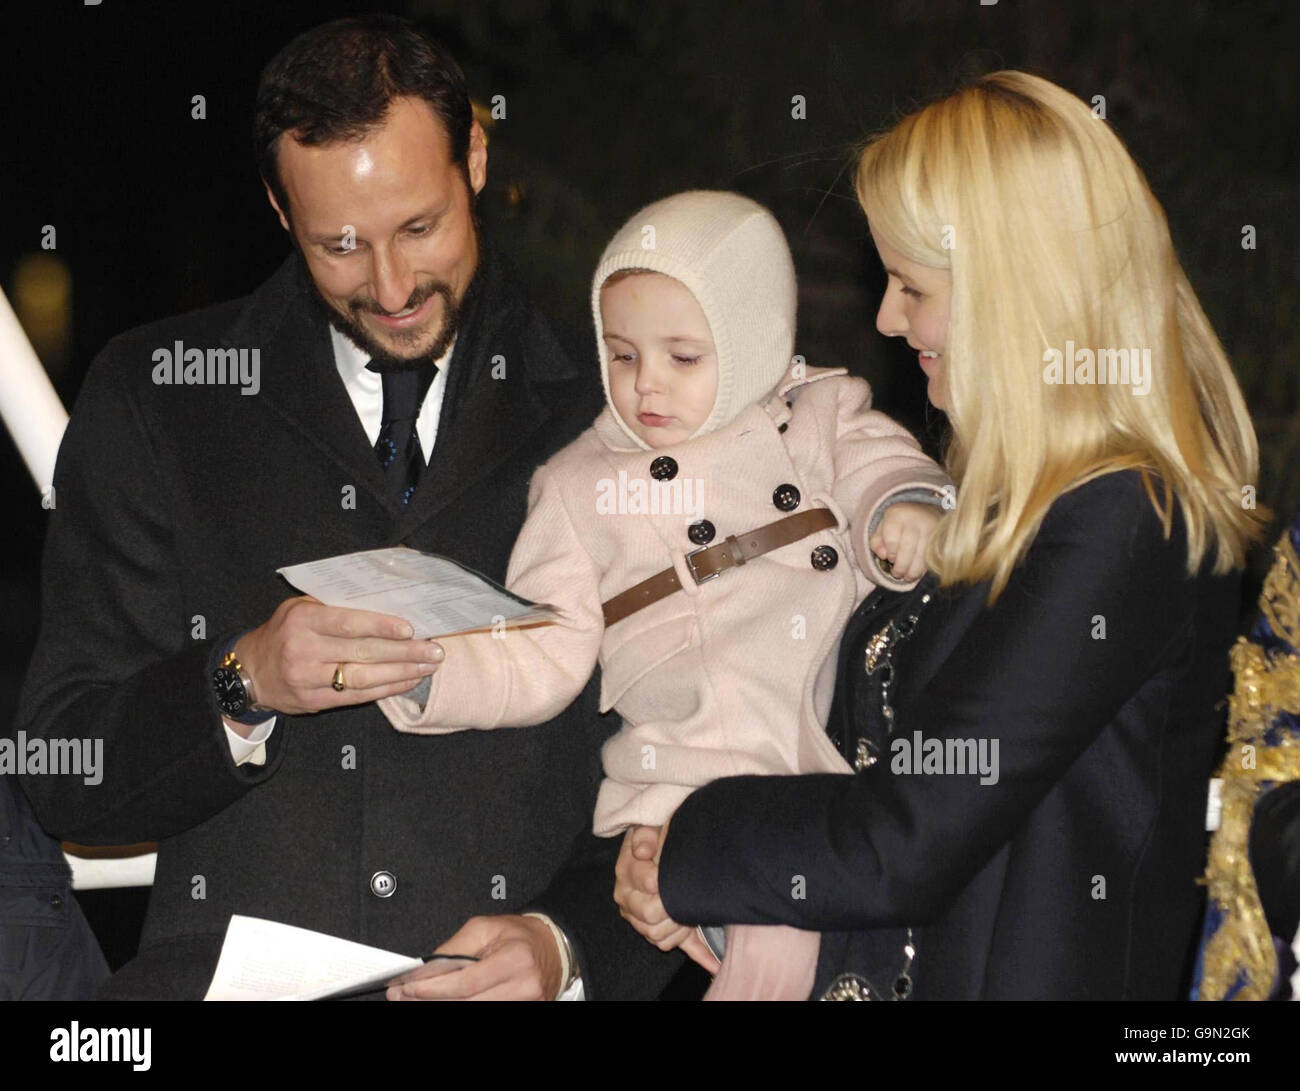 Princess Ingrid Alexandra of Norway is joined by her parents Crown Prince Haakon, left, and Crown Princess Mette-Marit reciting carols after switching on the lights of the christmas tree in Trafalgar Square in London. Stock Photo